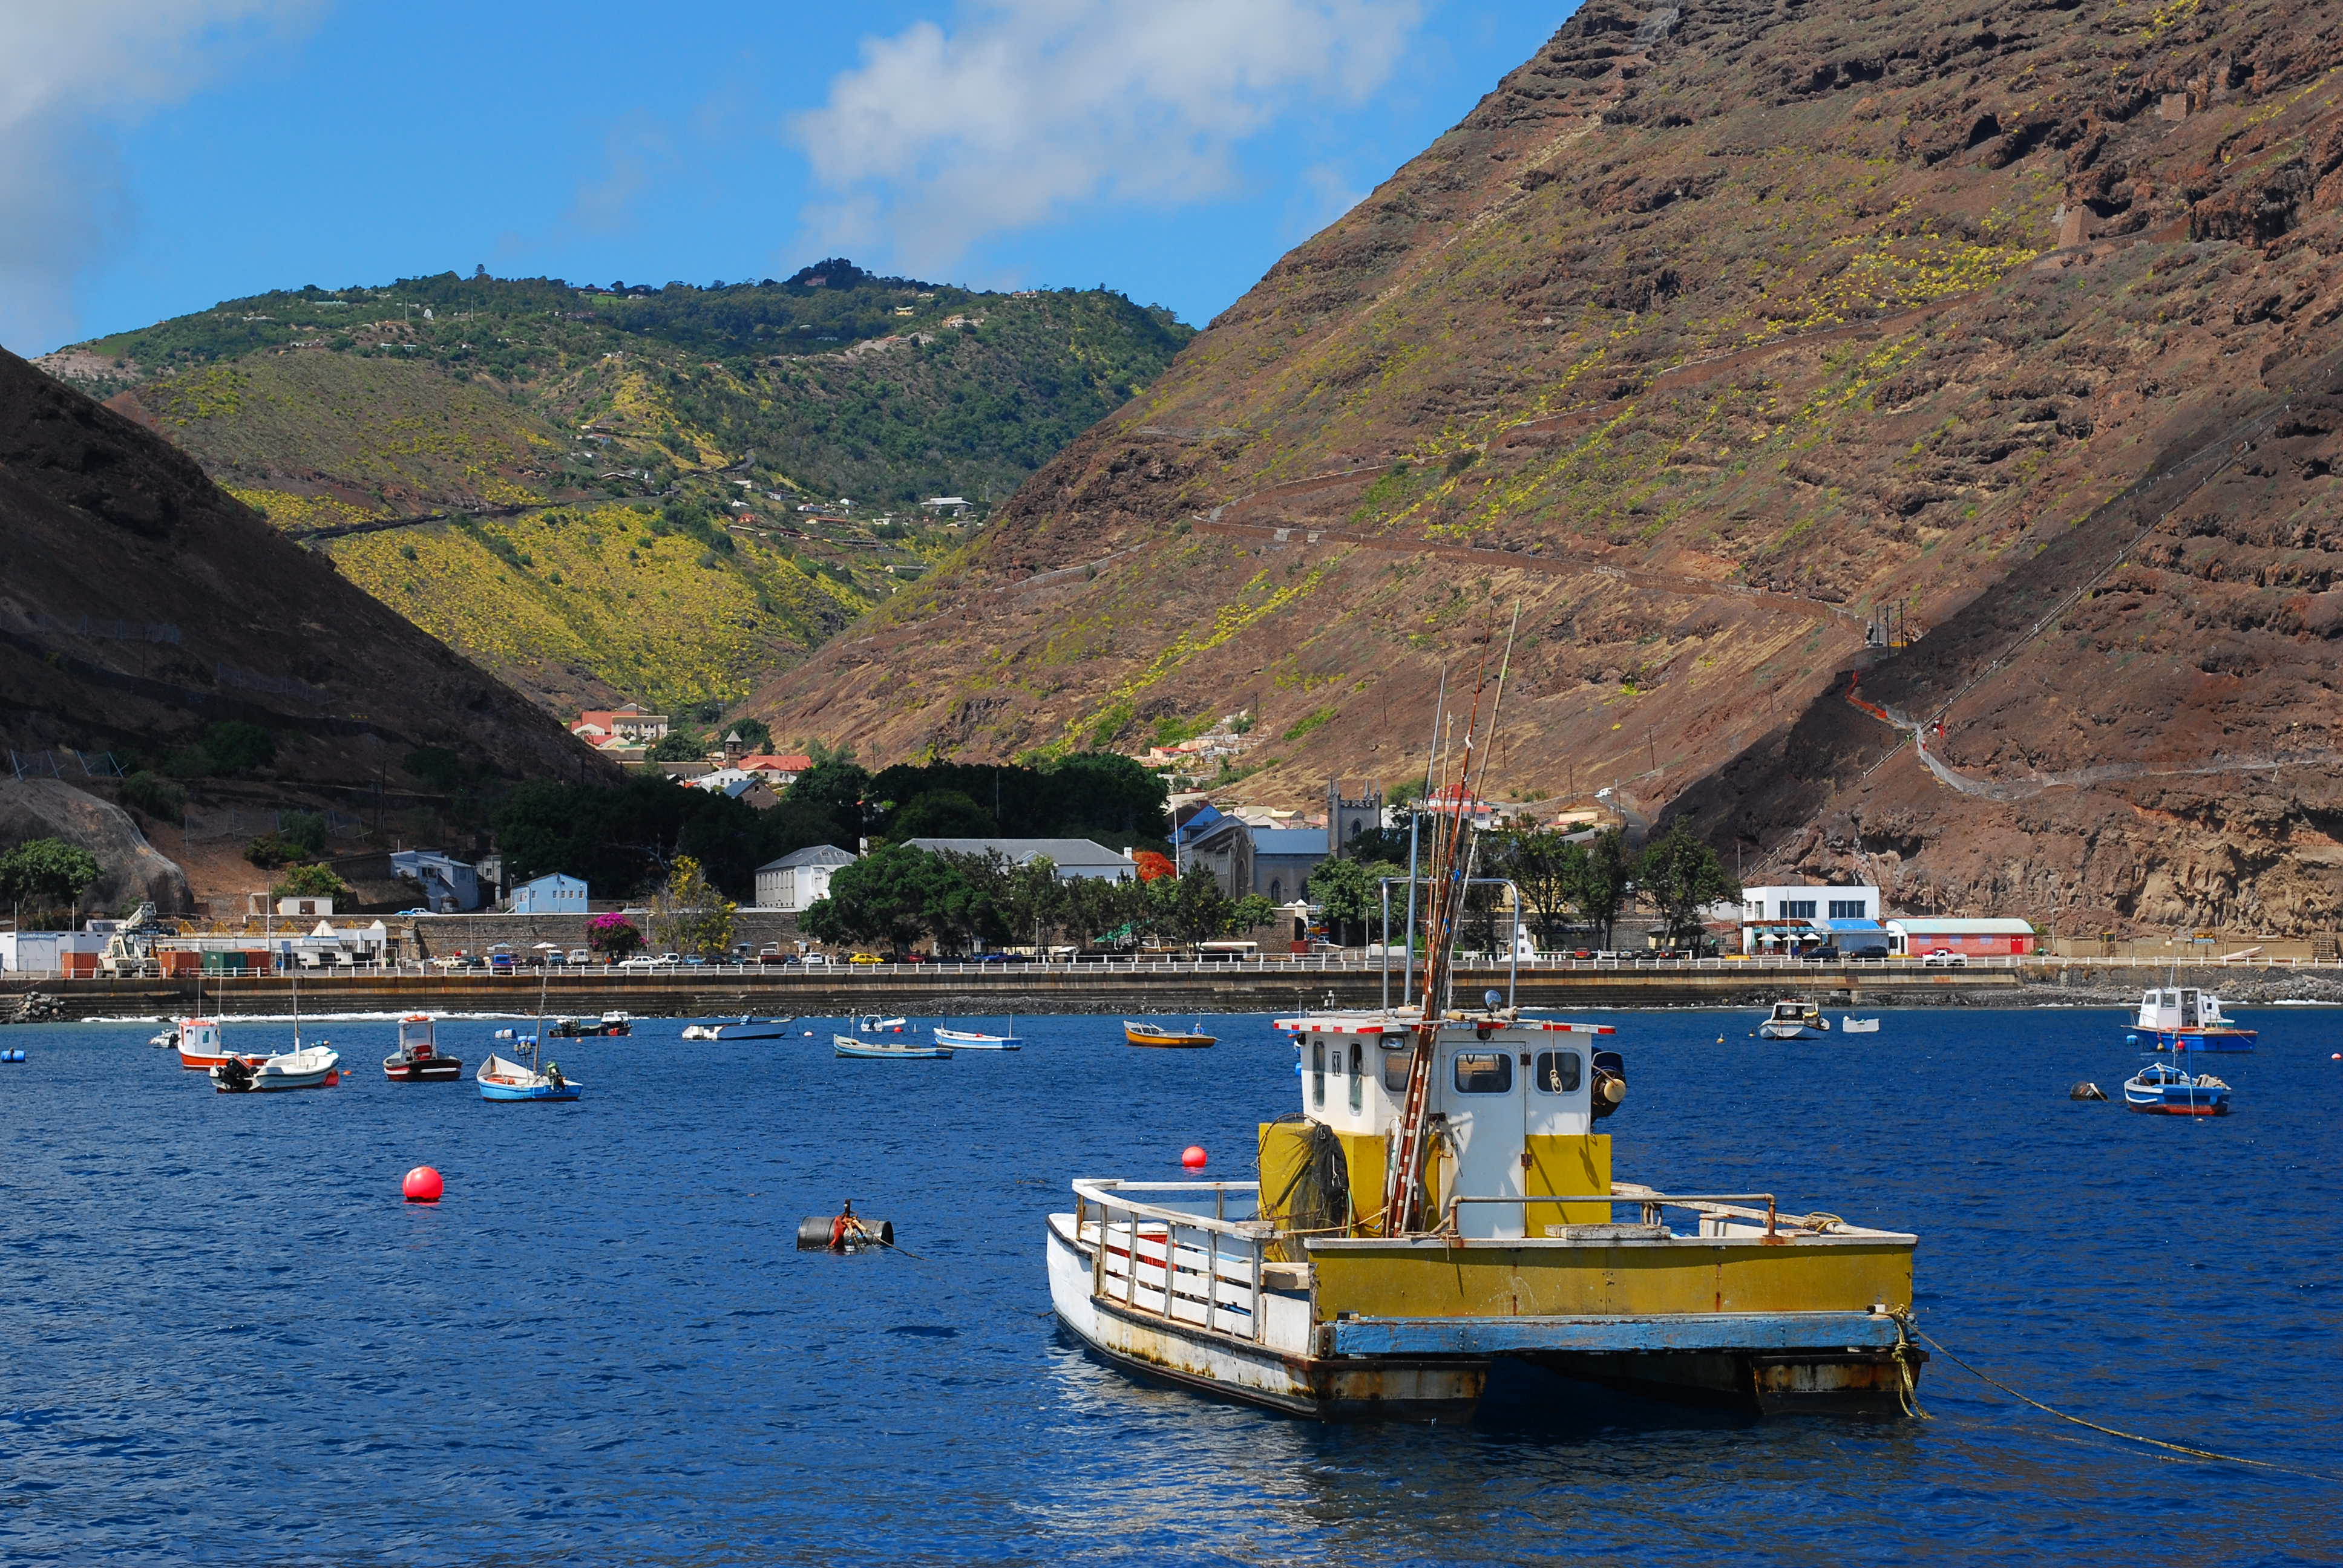 Credit: Fishing boat in Jamesbay by Ed Thorpe for St. Helena Tourism